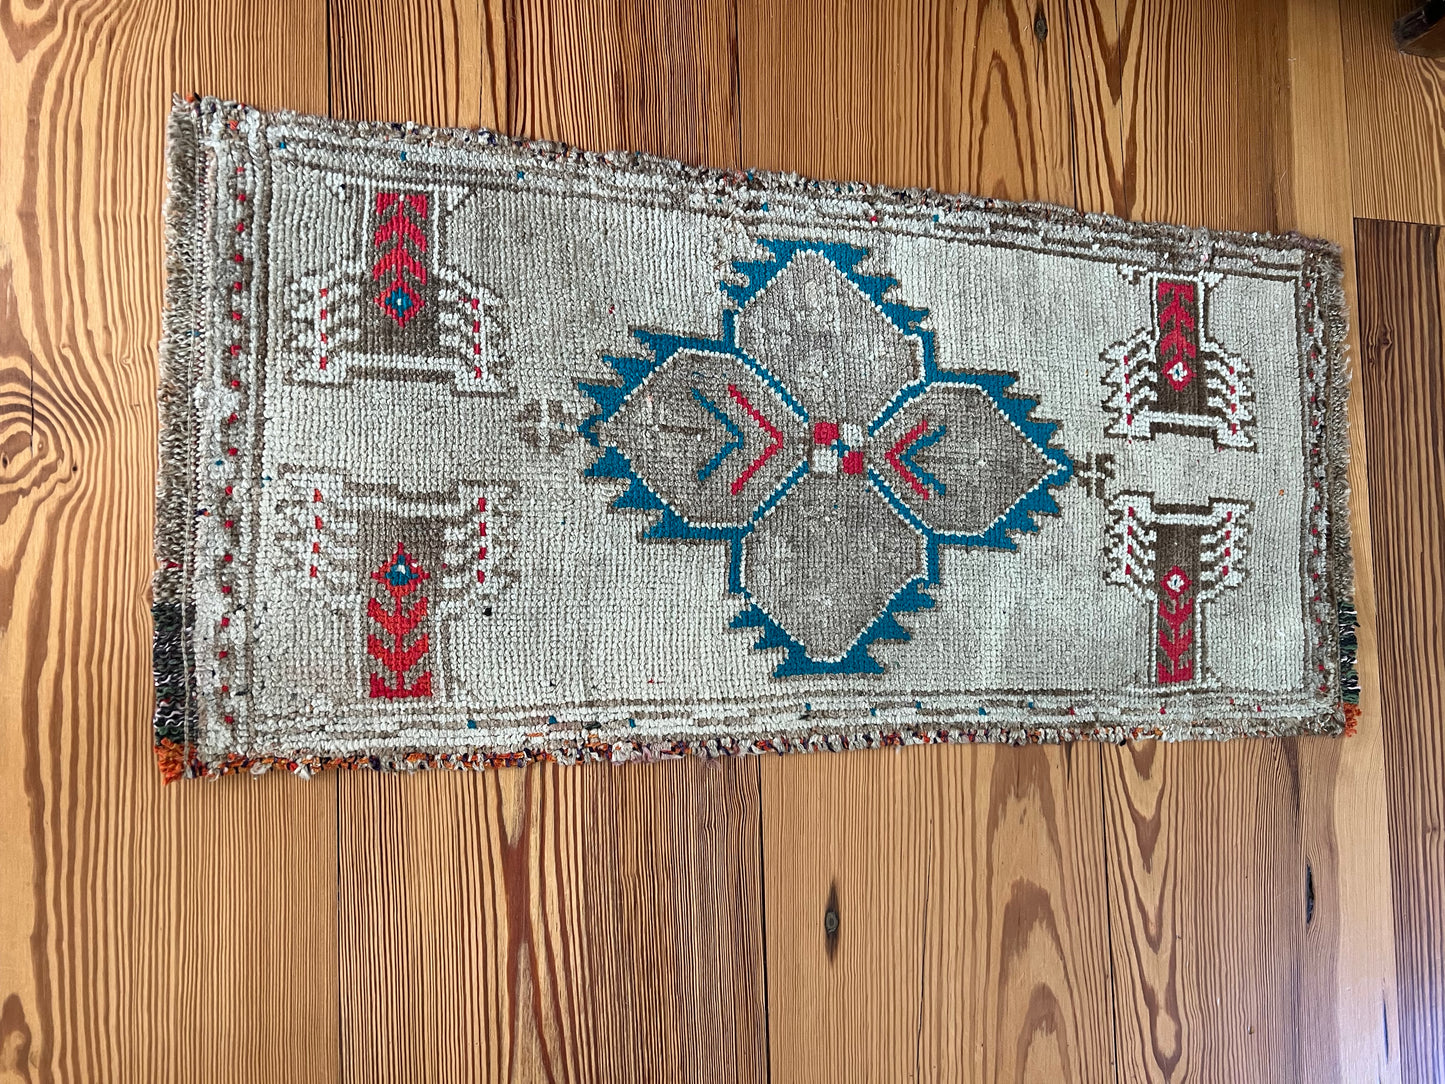 1'5" x 3' Small Rug with Red